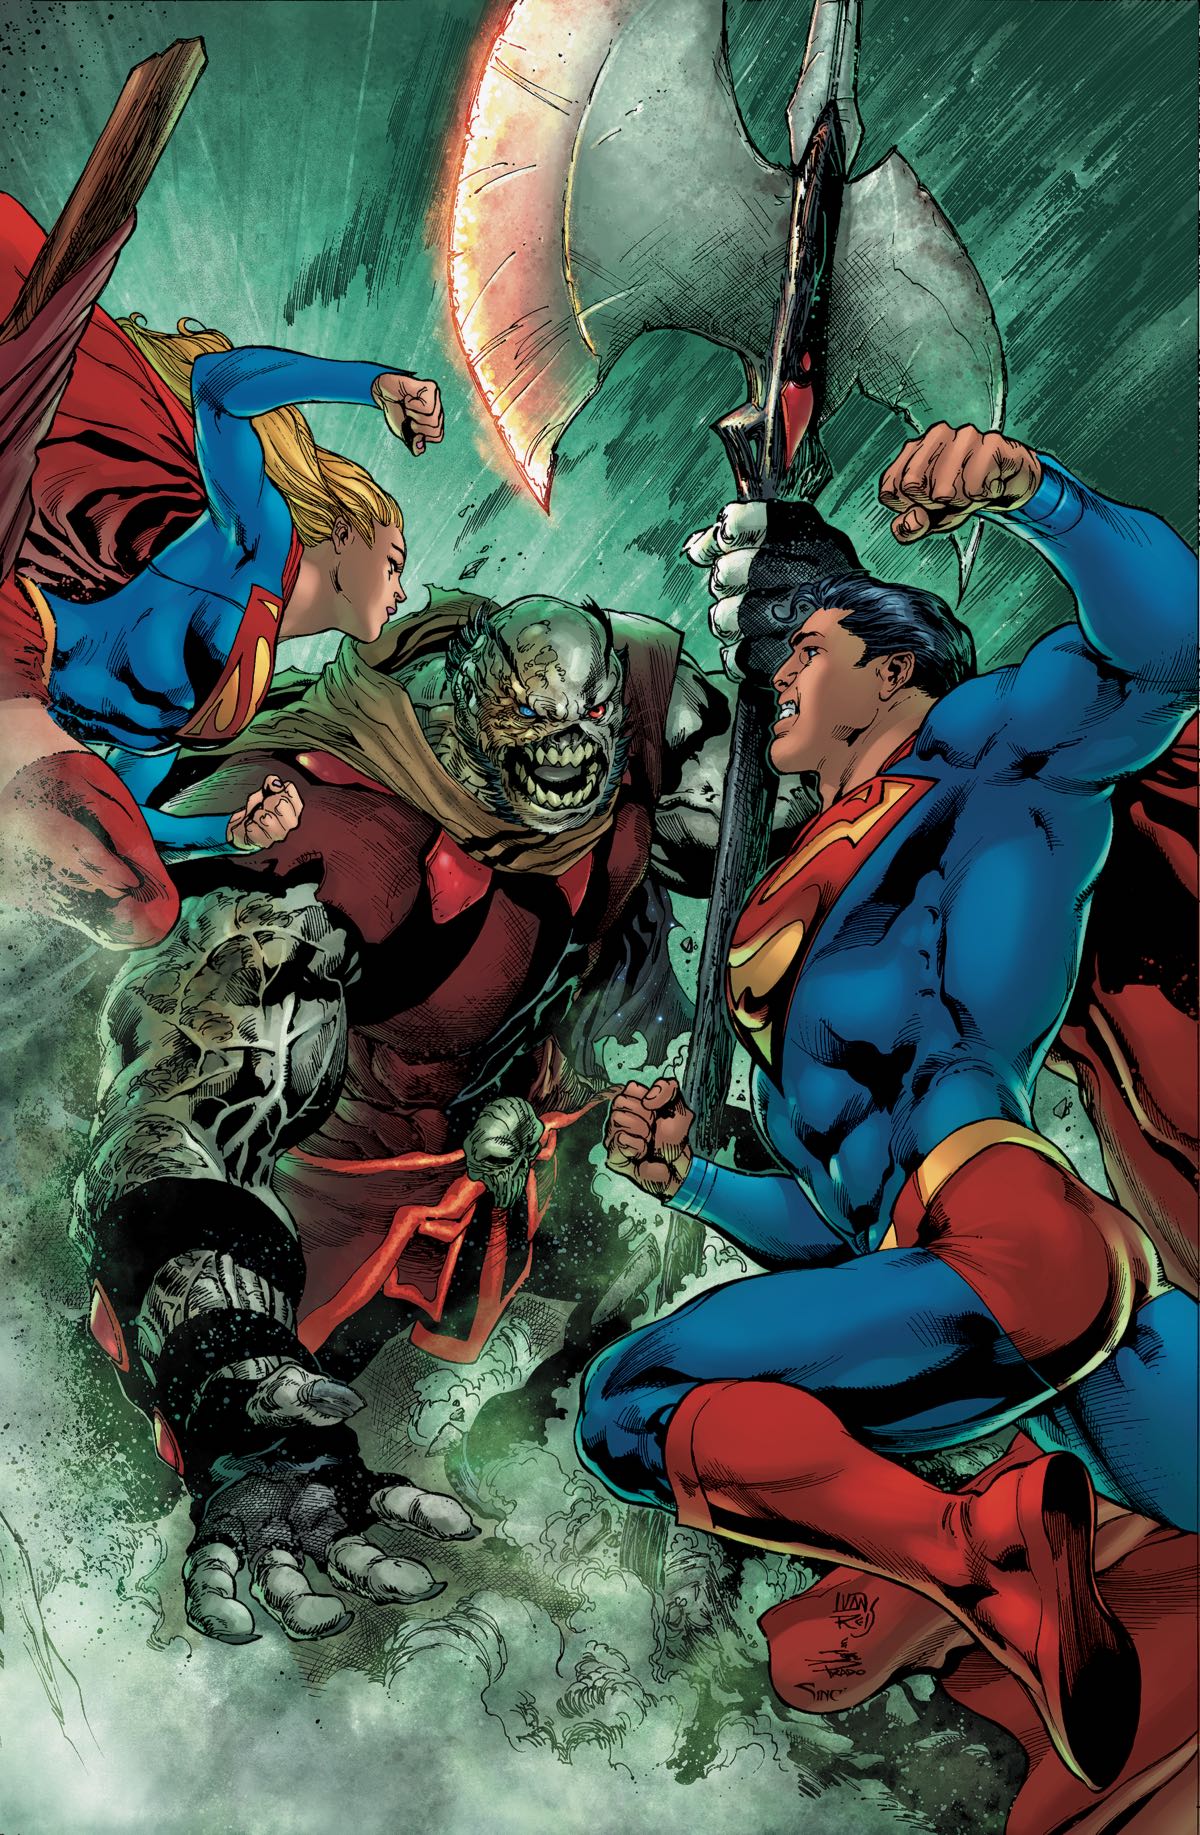 THE MAN OF STEEL #6